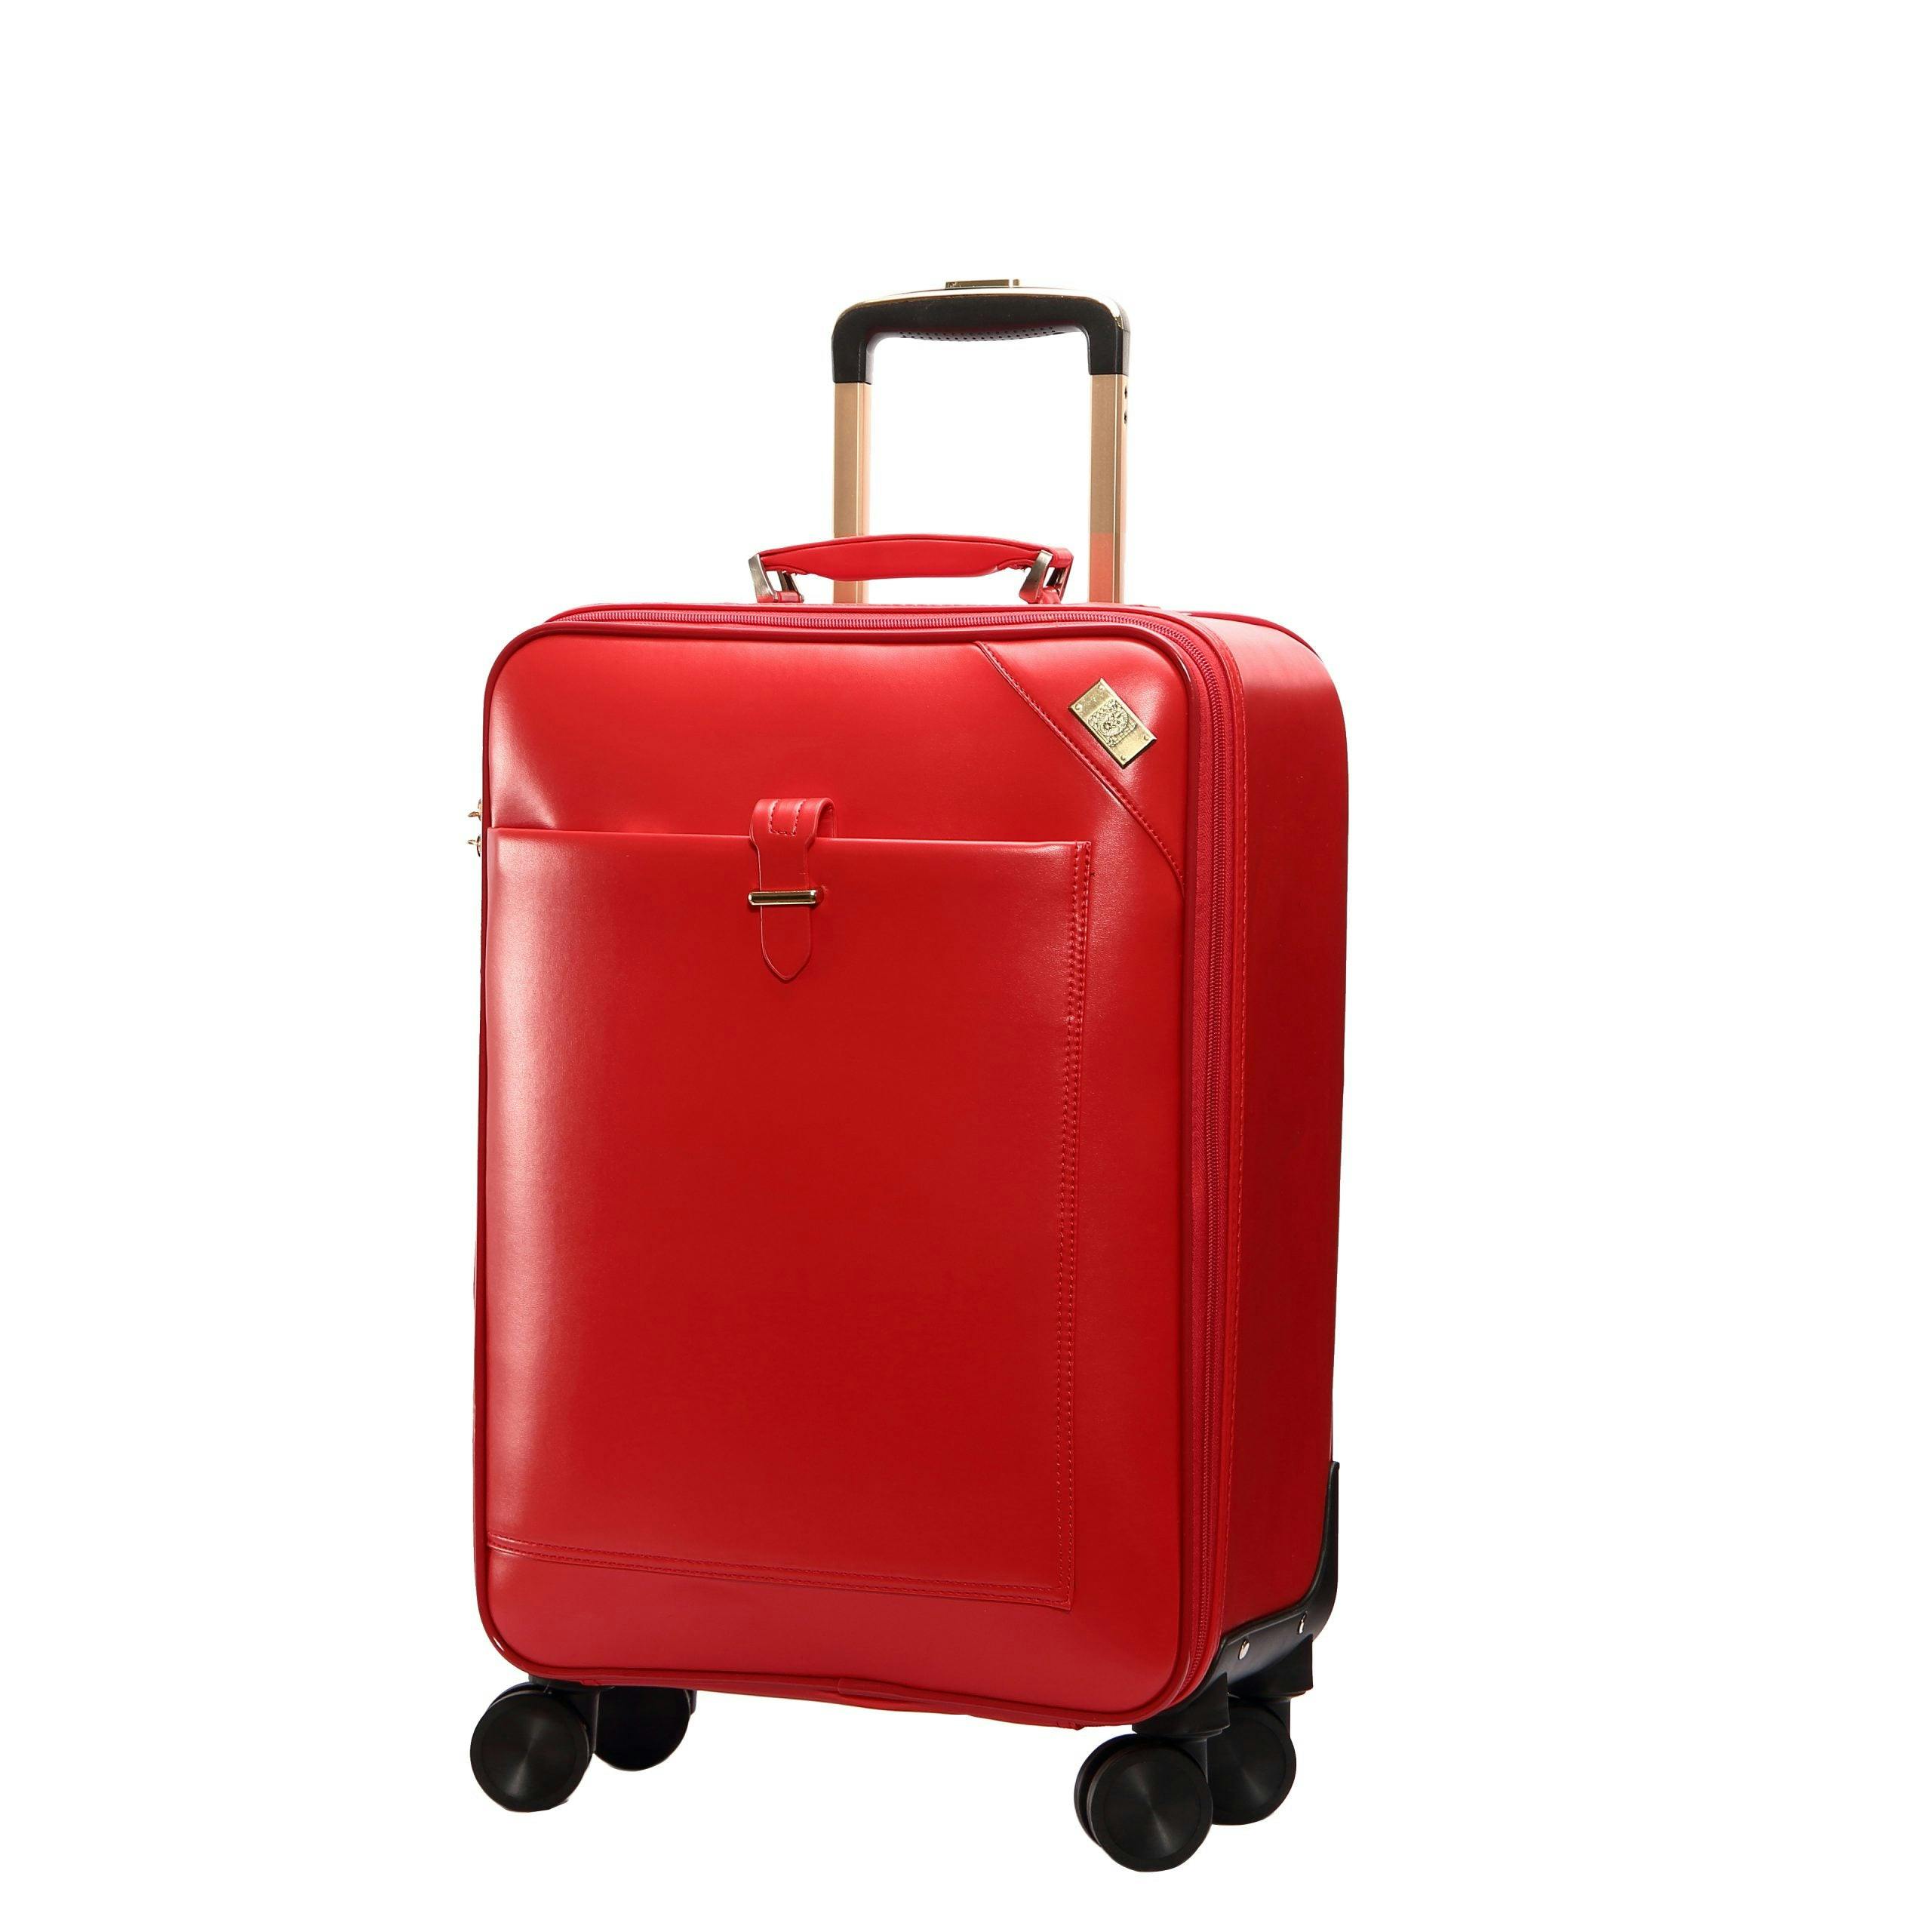 SEMMS RED LUXURIOUS LEATHER LUGGAGE